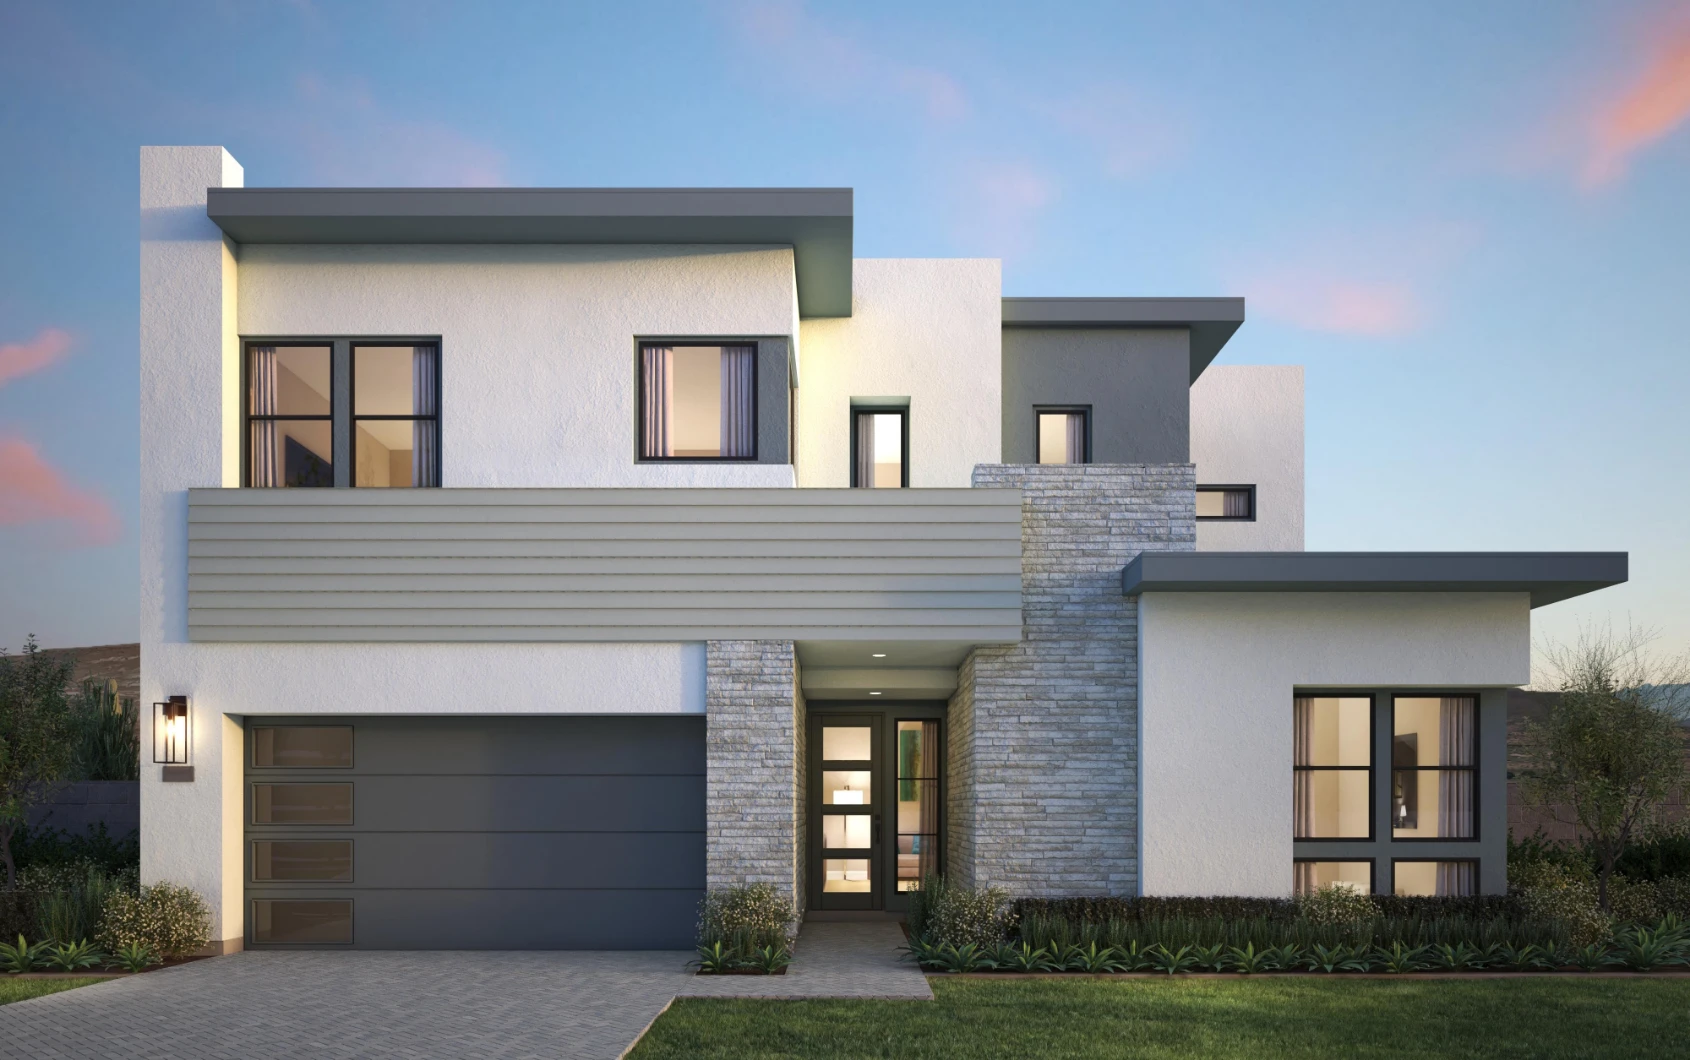 Modern style, 2-story, with chimney home rendering